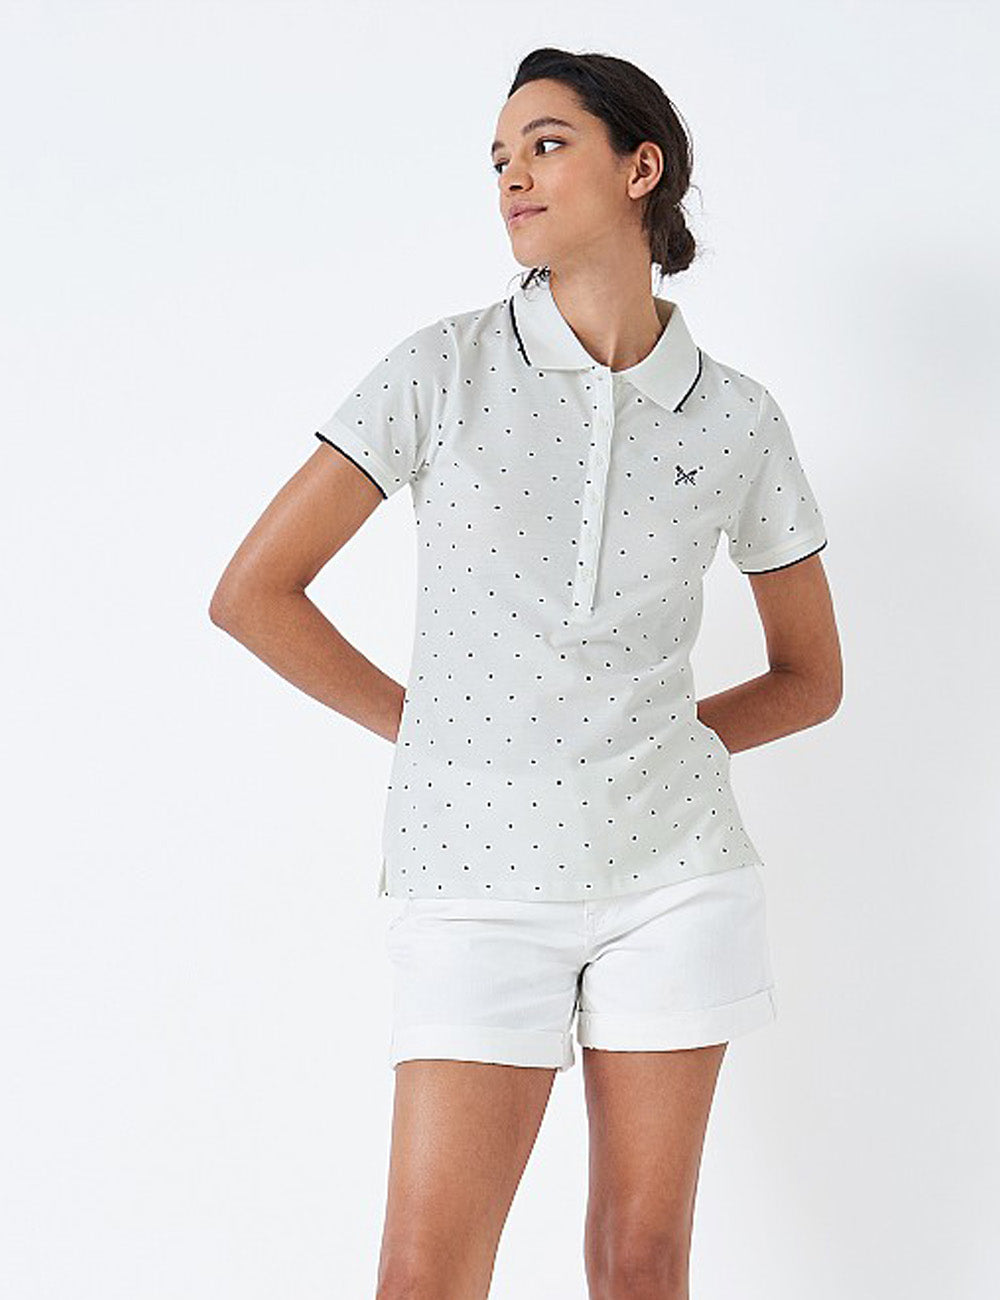 Woman wearing the Classic Polo Shirt with white shorts and her hands behind her